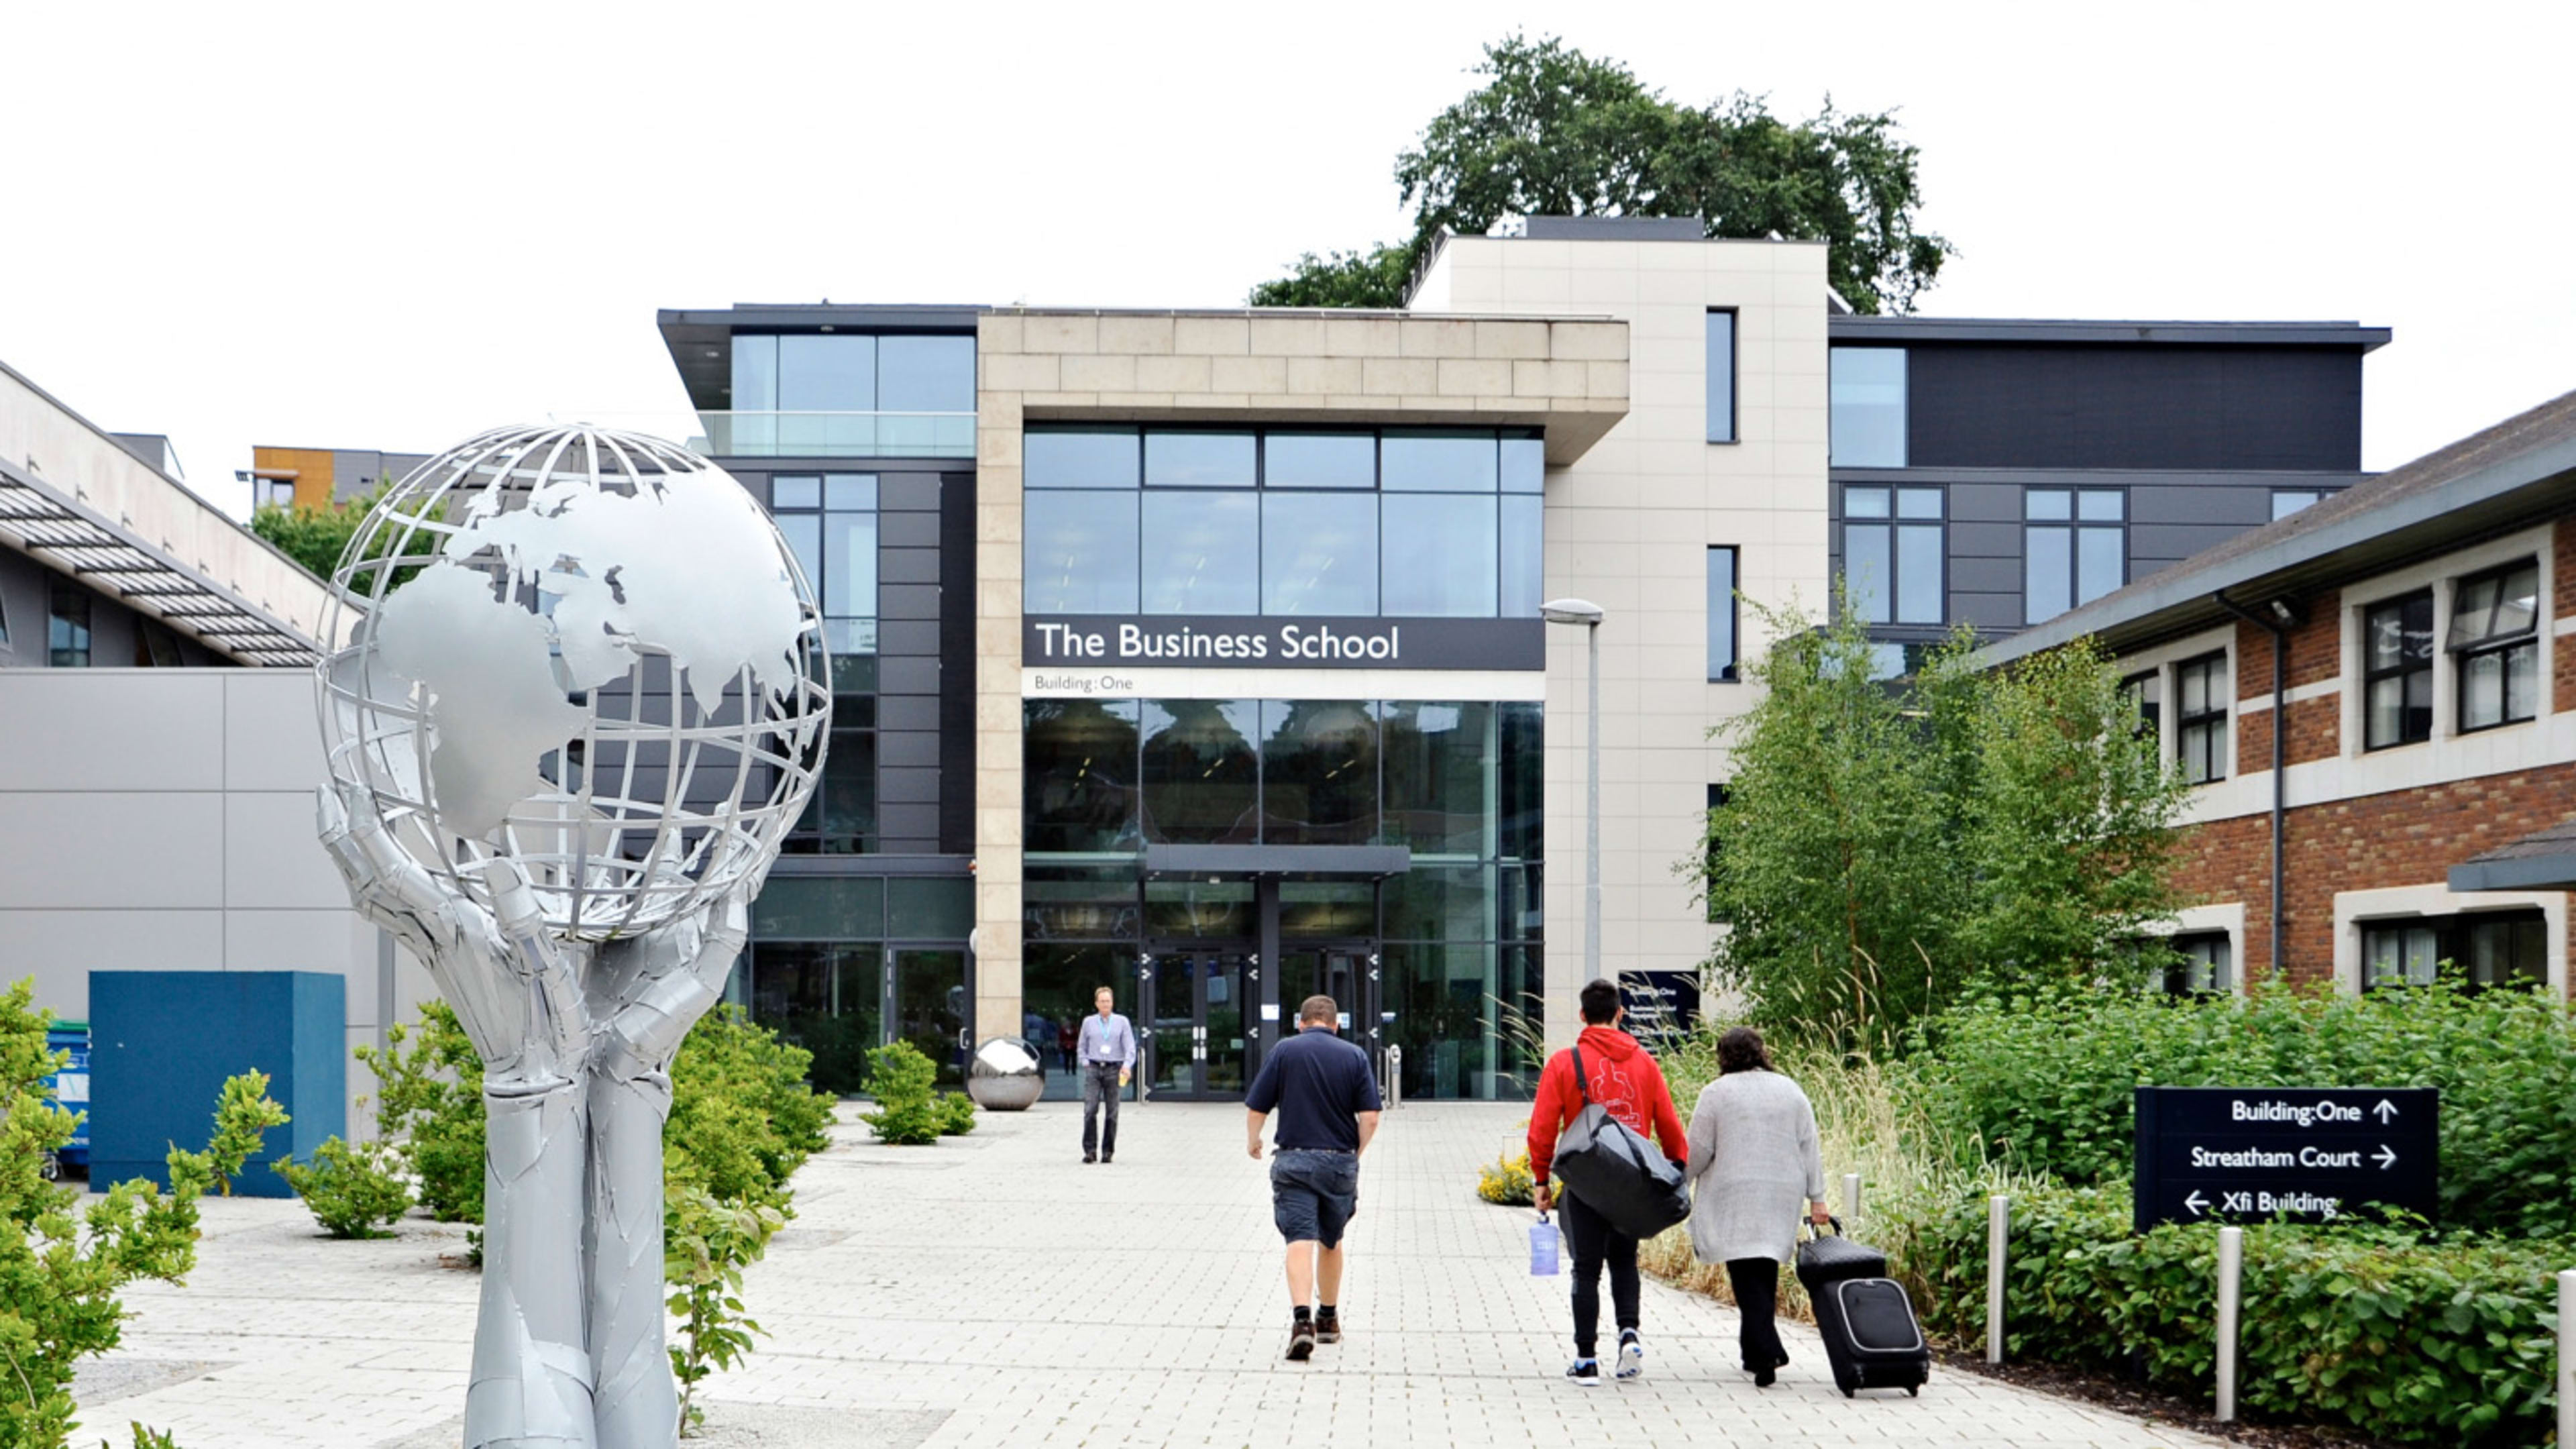 Exterior image of Exeter Business School building  